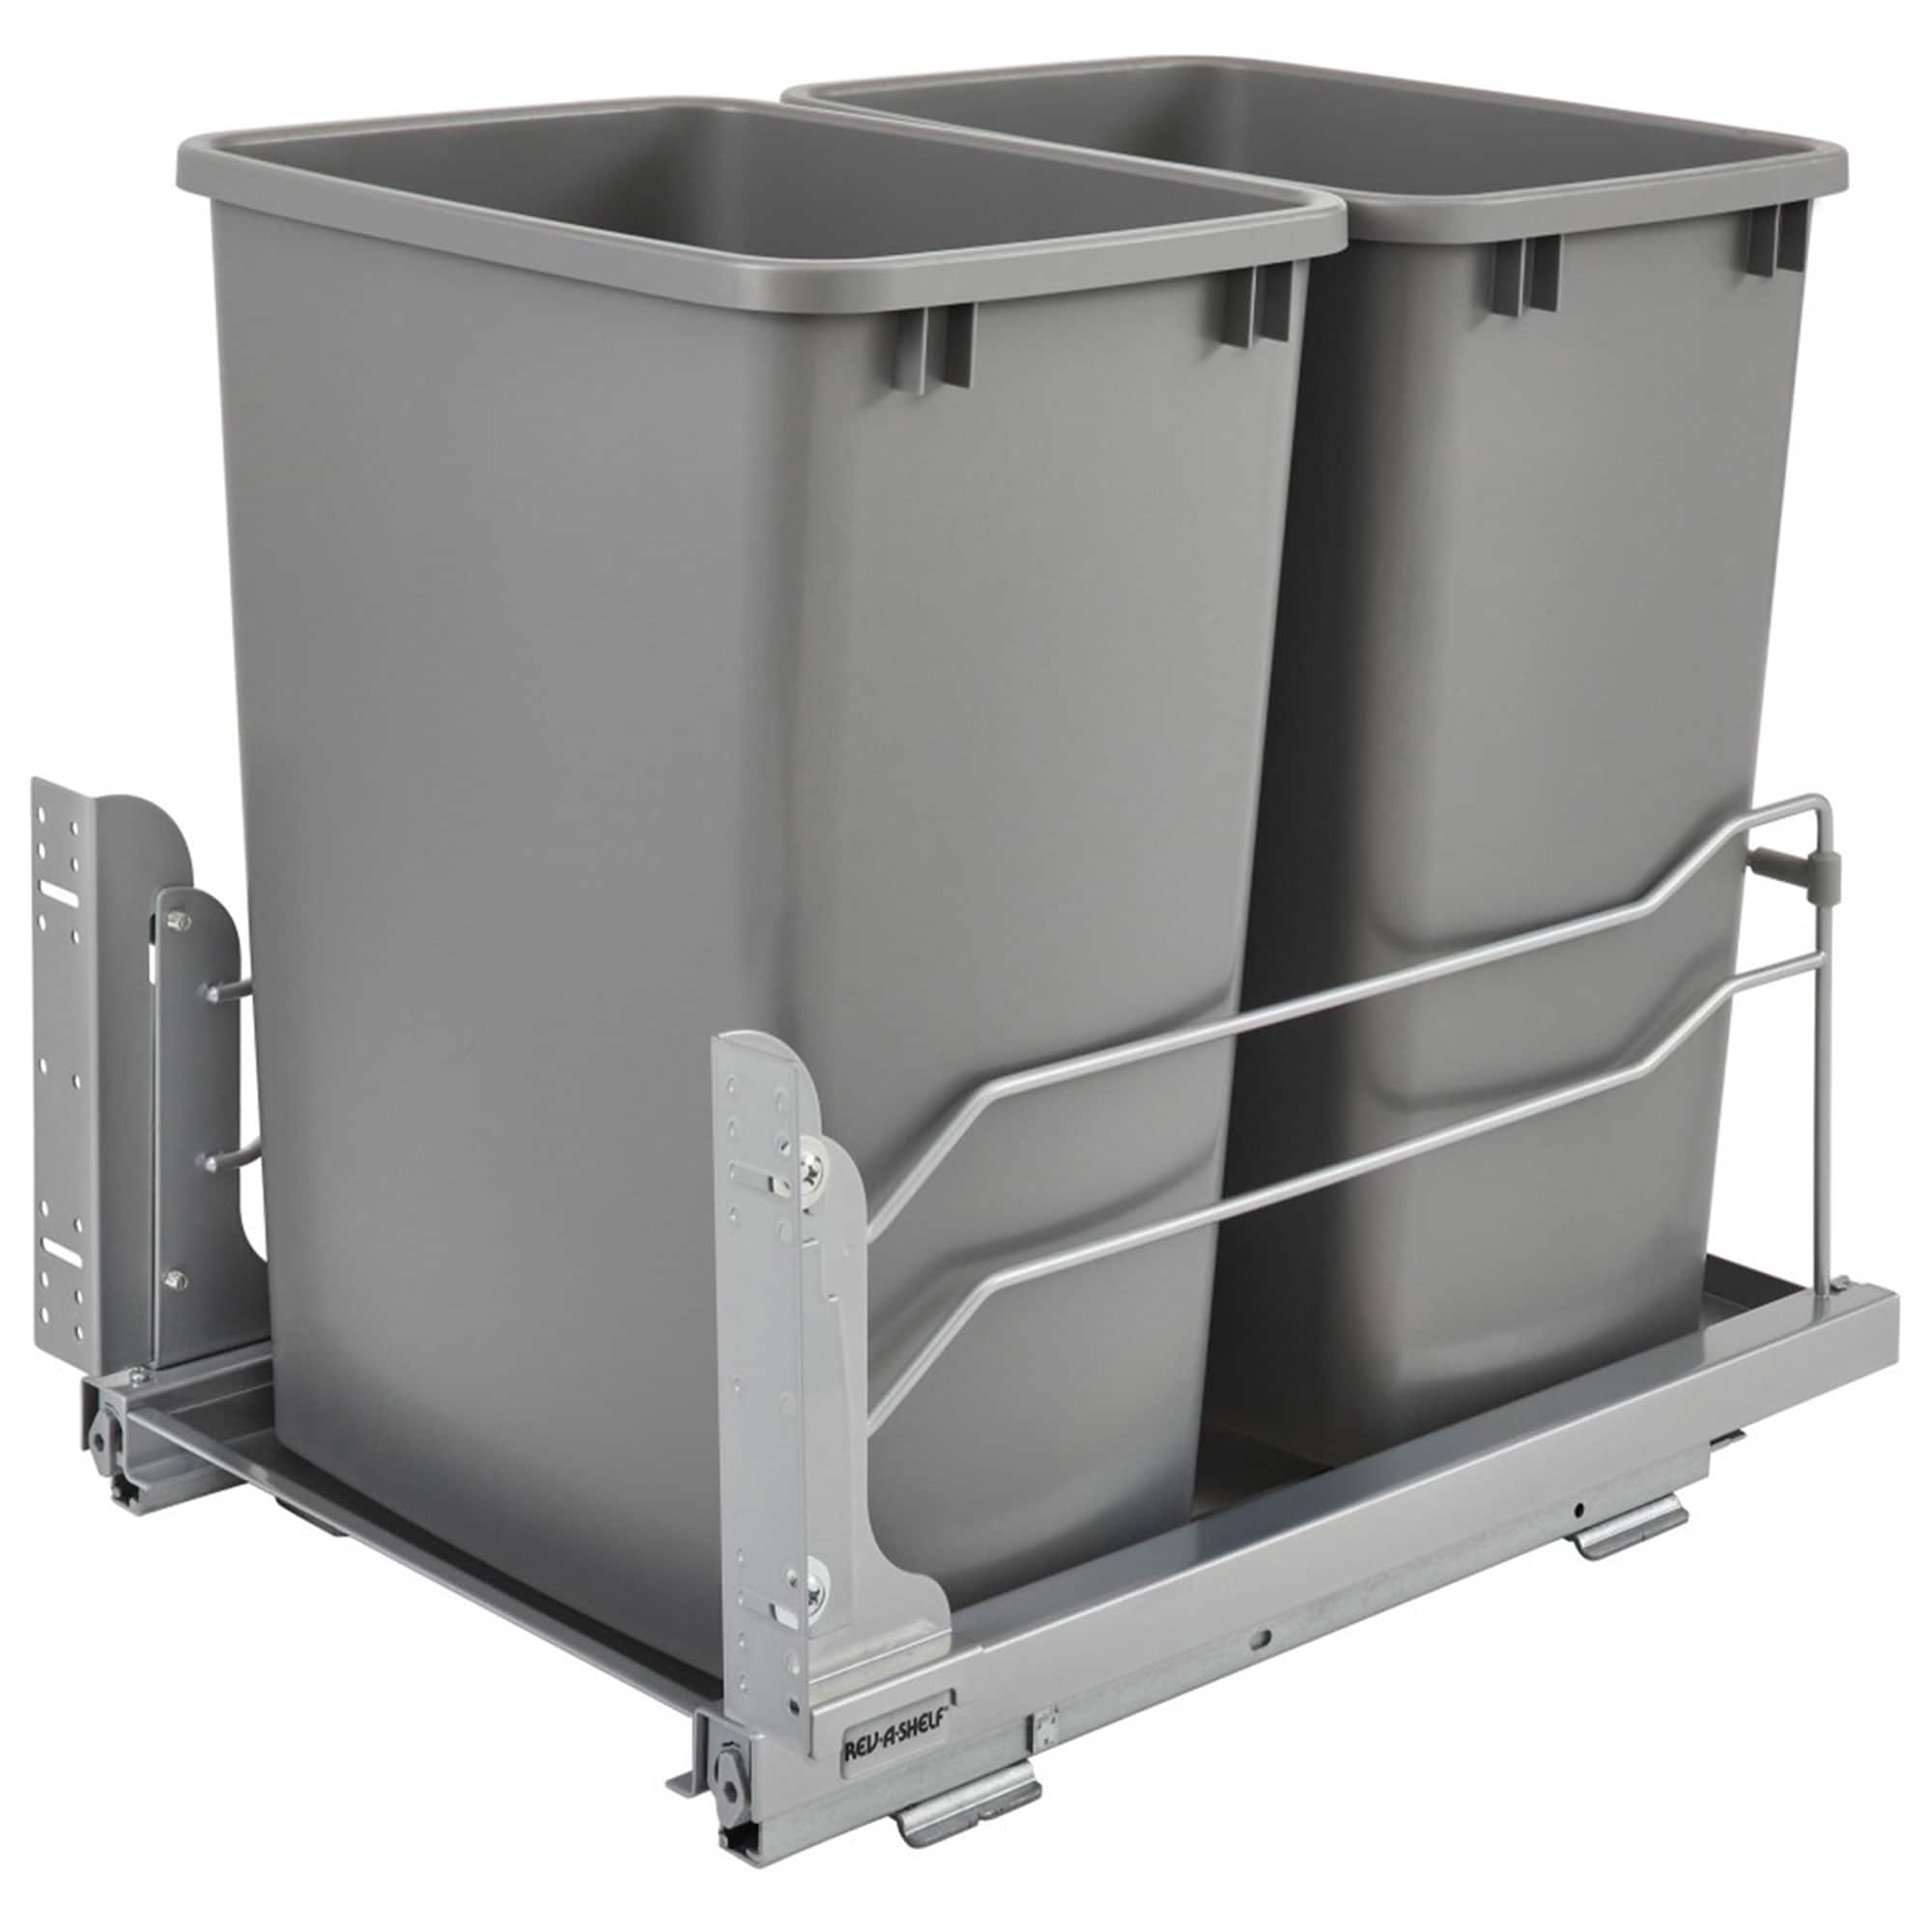 Home Zone Living 15 gal Kitchen Pull Out Sliding Garbage Can, Steel,Silver